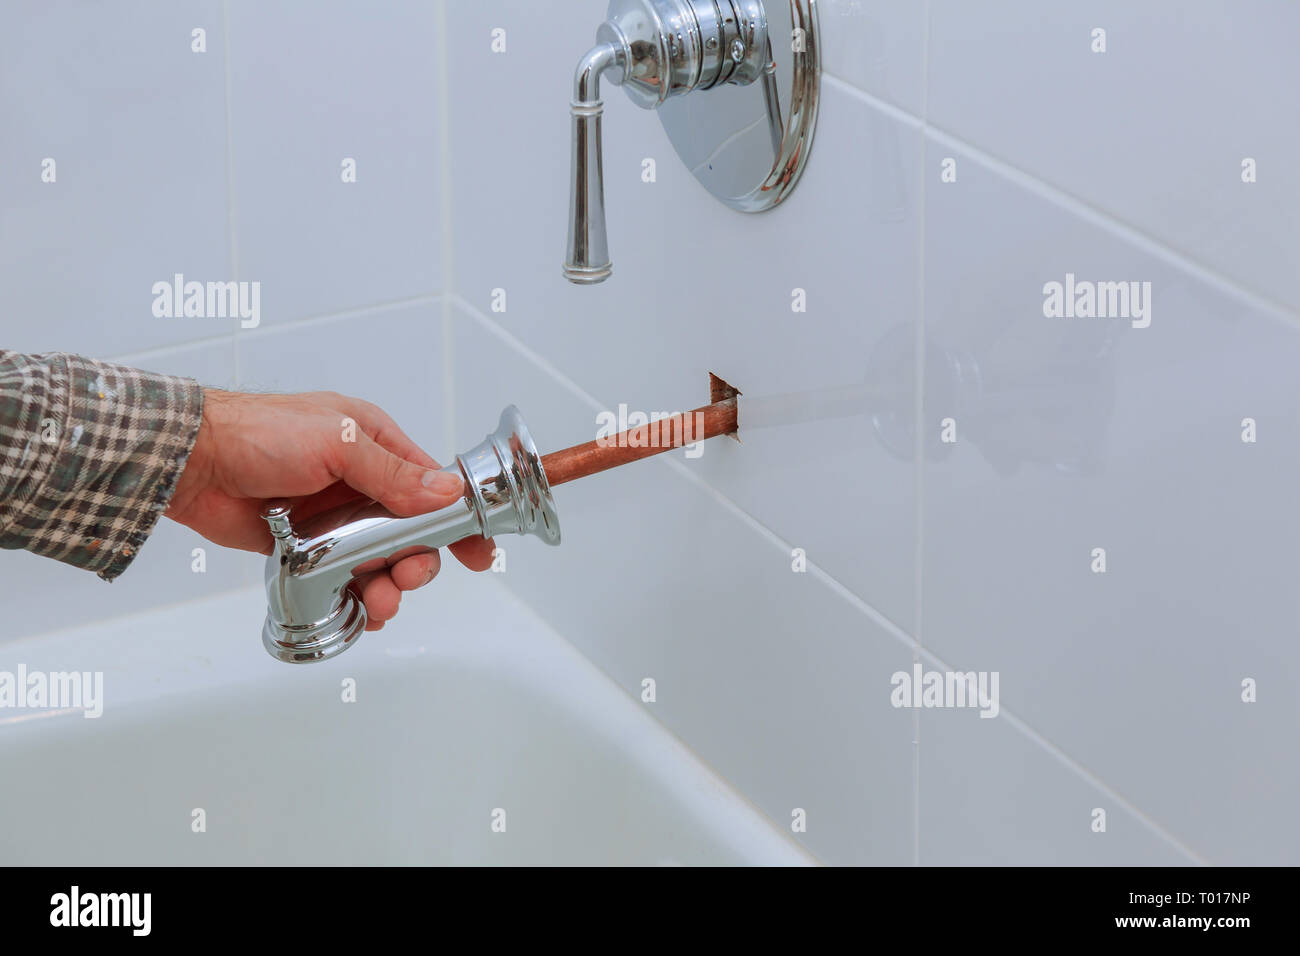 Plumber installing water faucet in the bathroom with thermostat Stock Photo